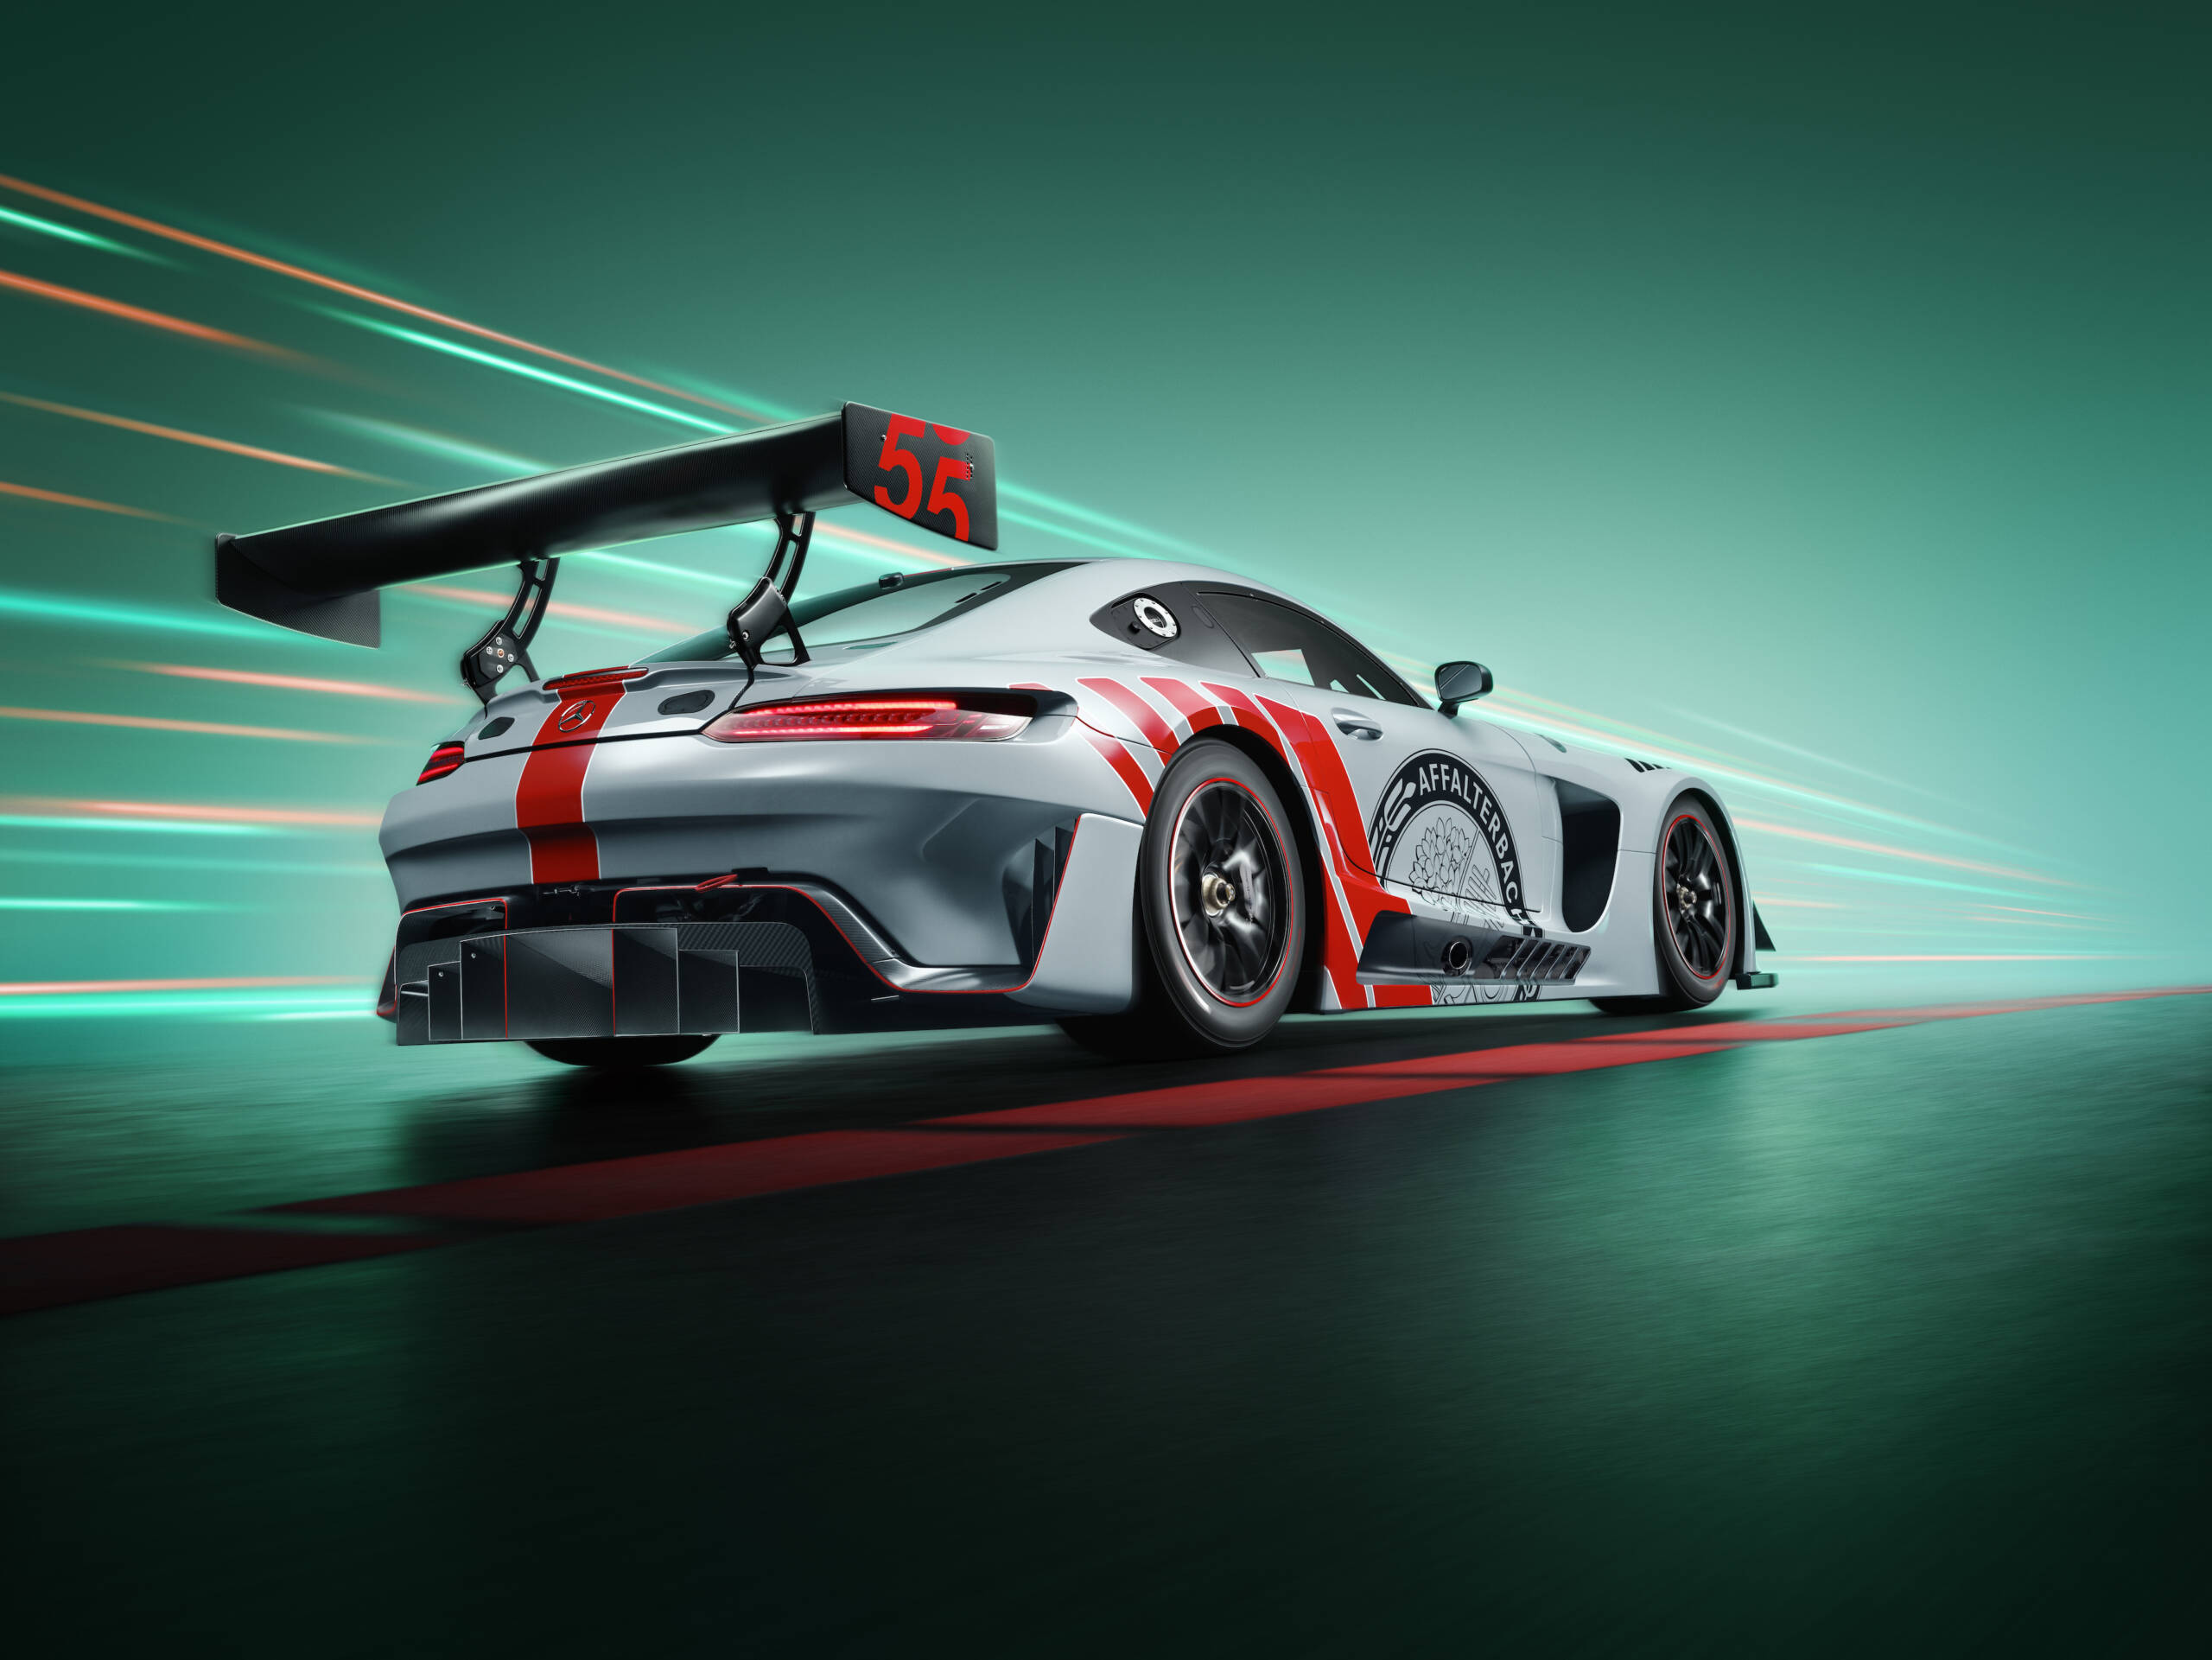 Mercedes-AMG GT3 as a strictly limited EDITION 55 special series